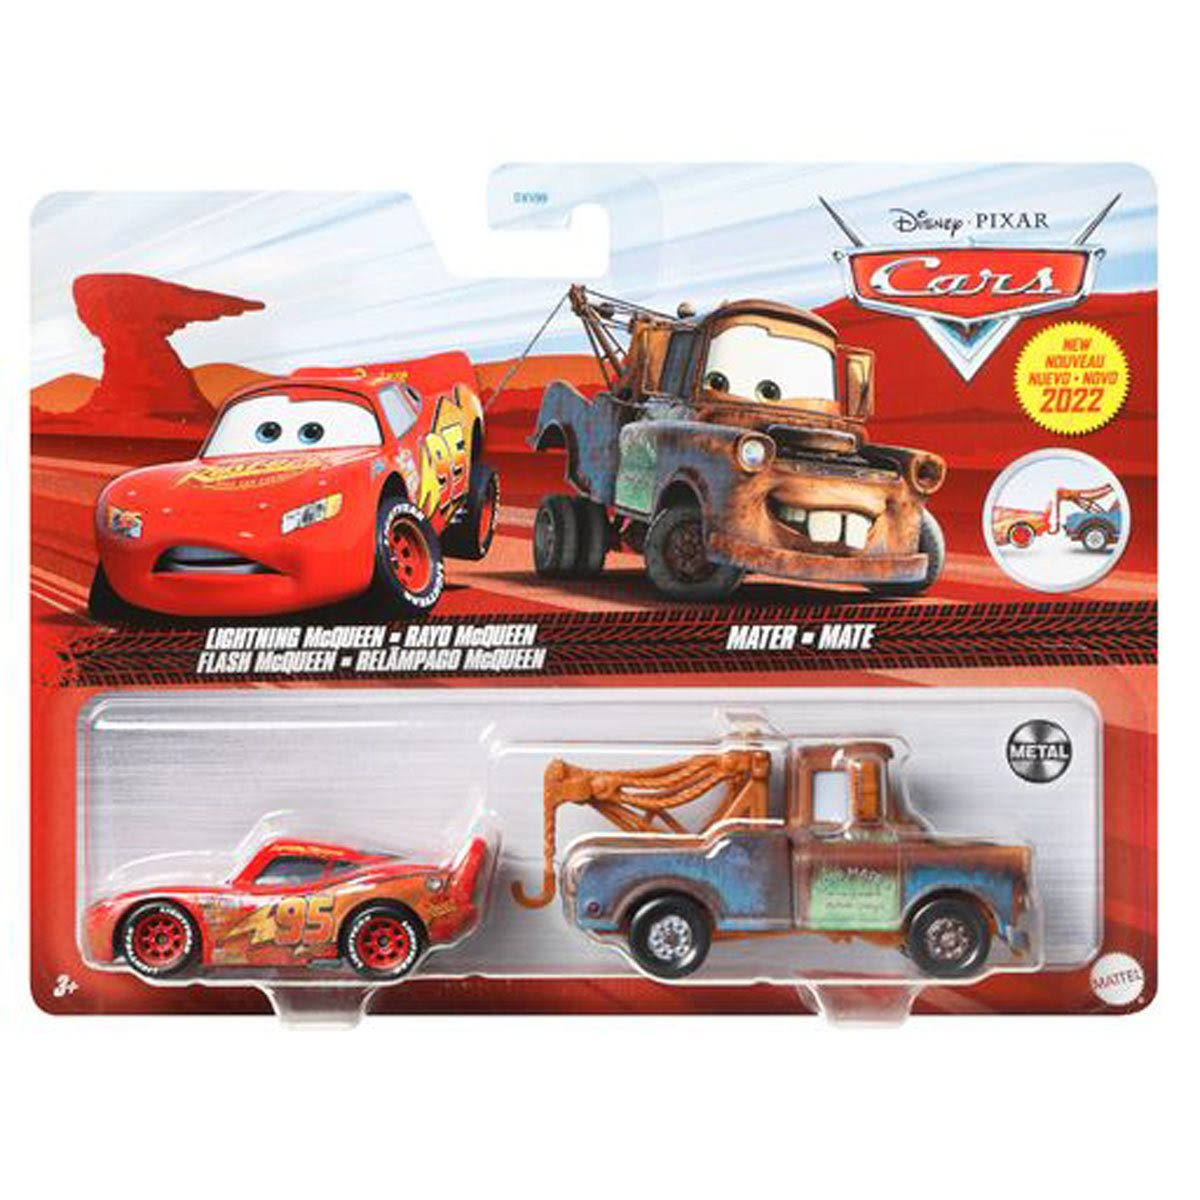 Disney Cars Toys and Pixar Cars 3, Mater & Lightning McQueen 2-Pack, 1:55 Scale Die-Cast Fan Favorite Character Vehicles for Racing and Storytelling